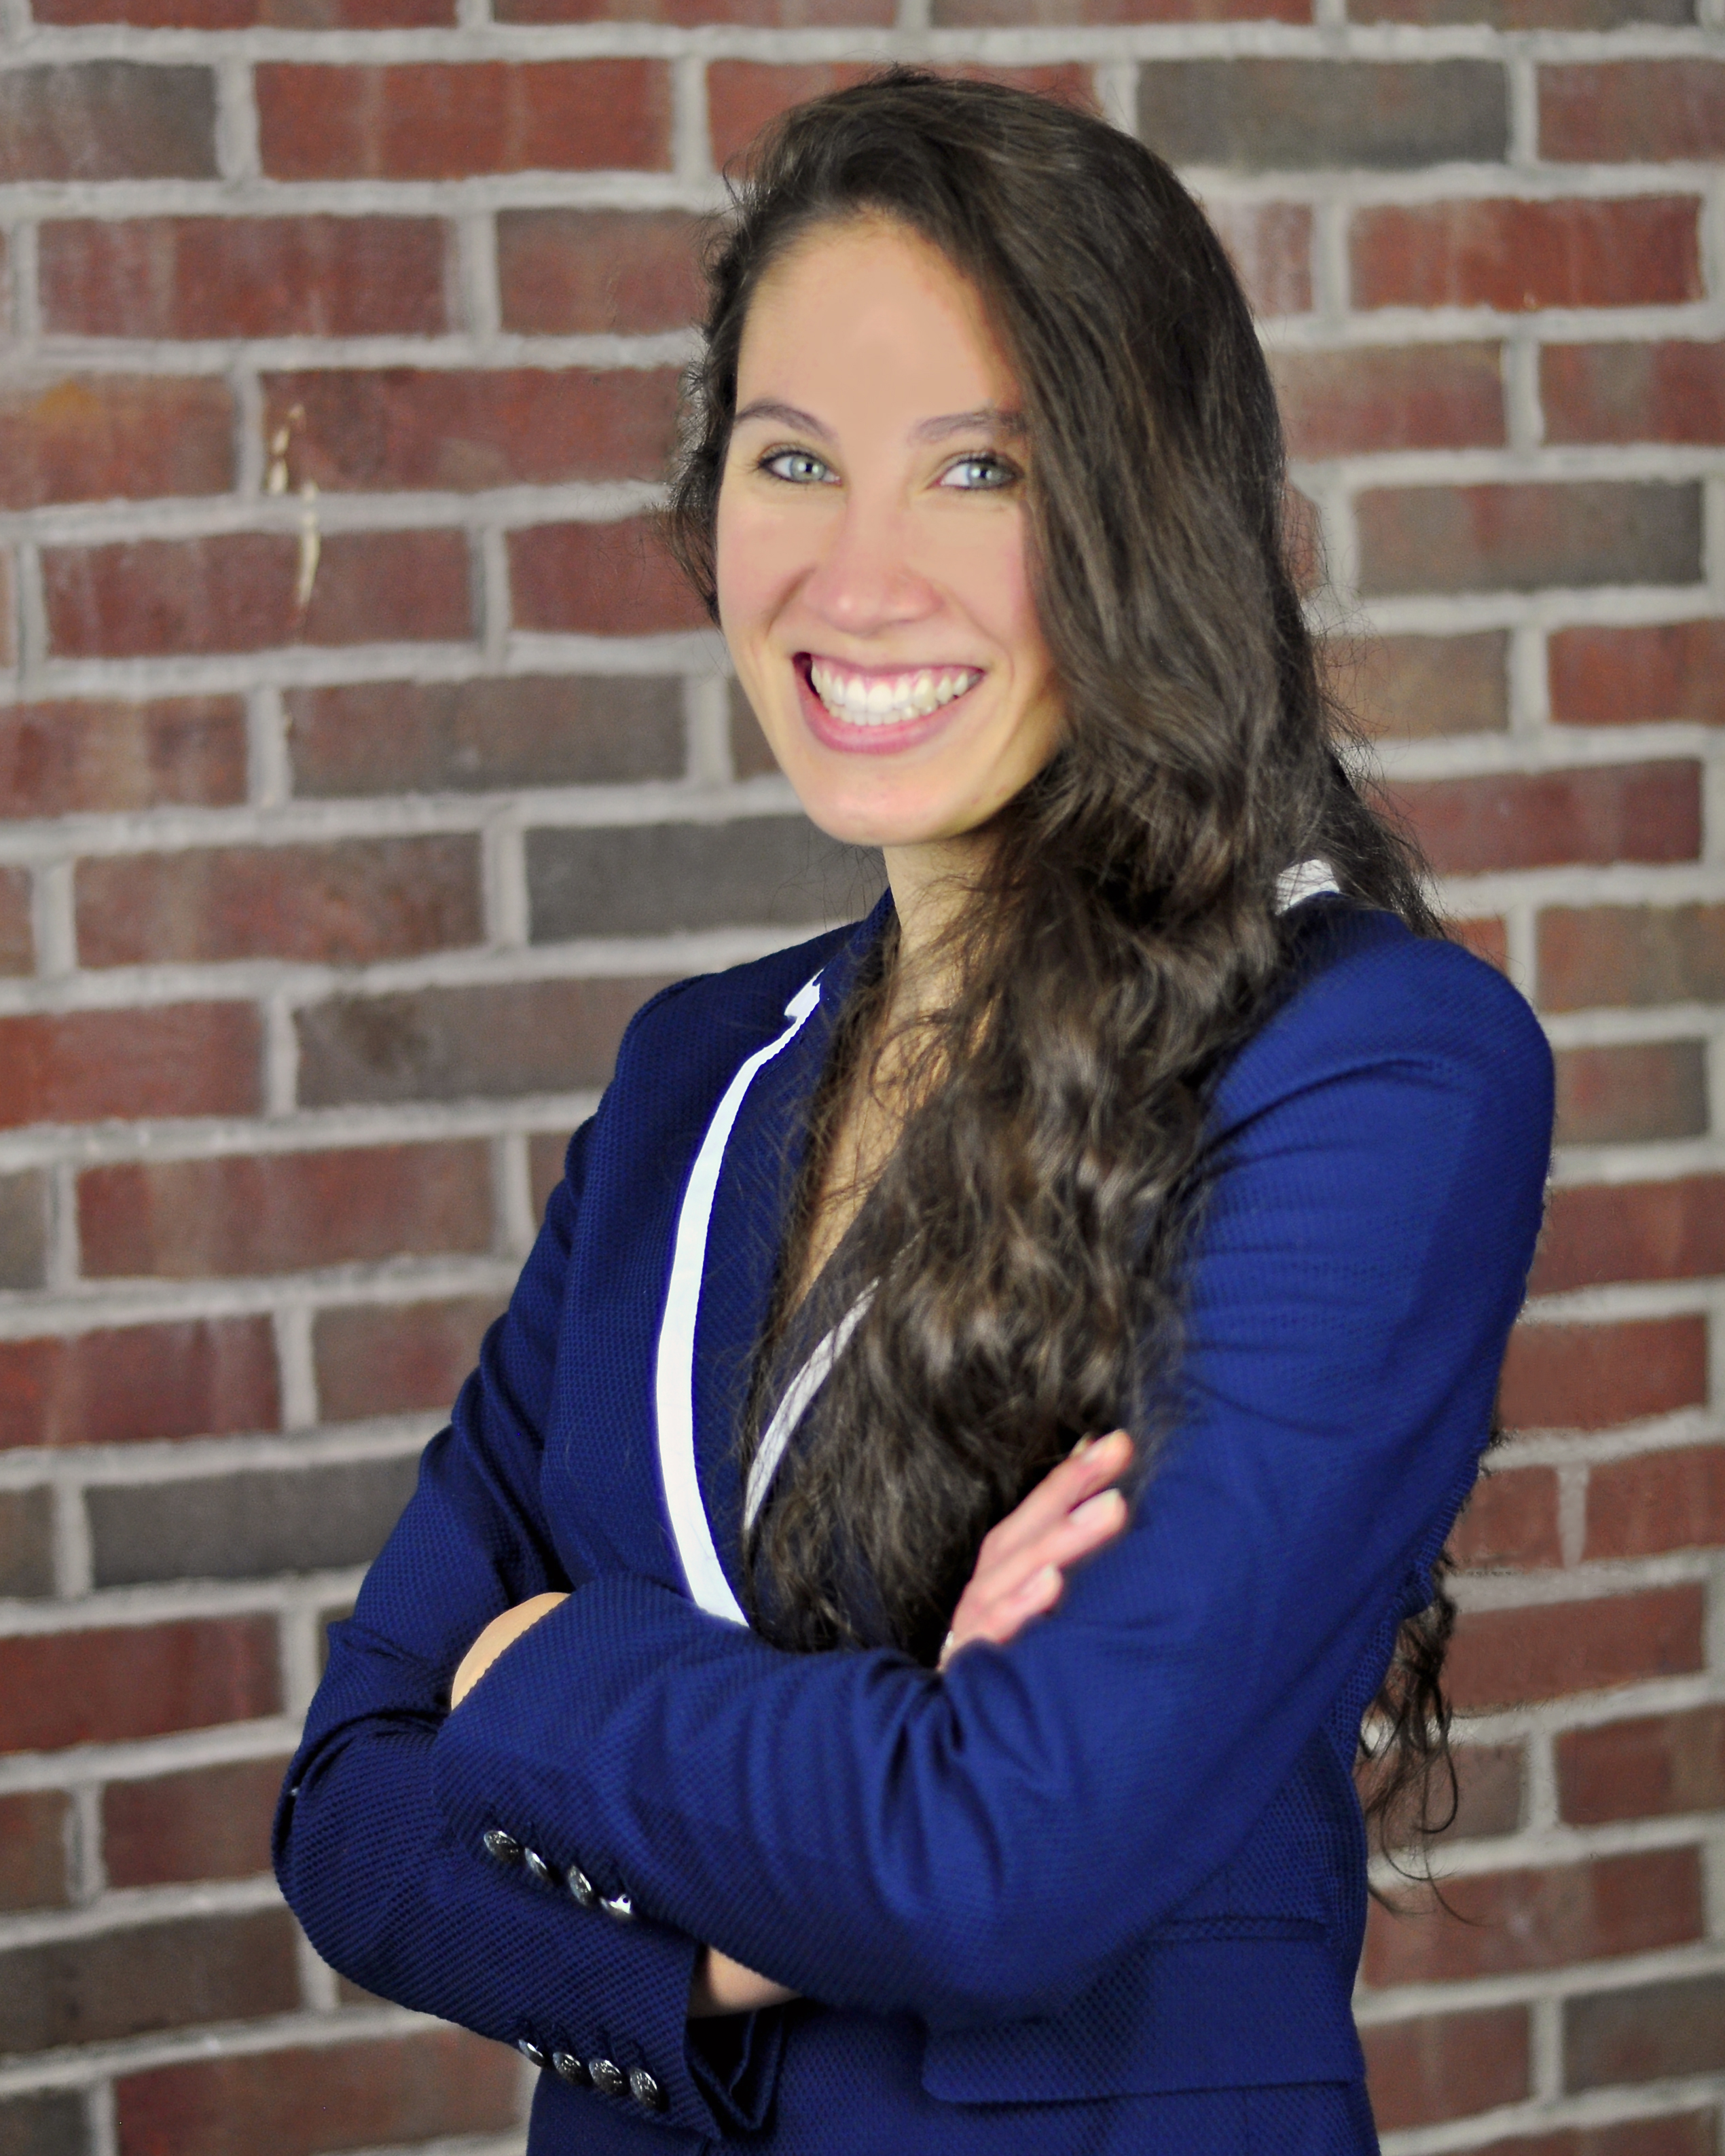 A2Y Chamber Welcomes Lizzy Balboa, Public Policy Intern